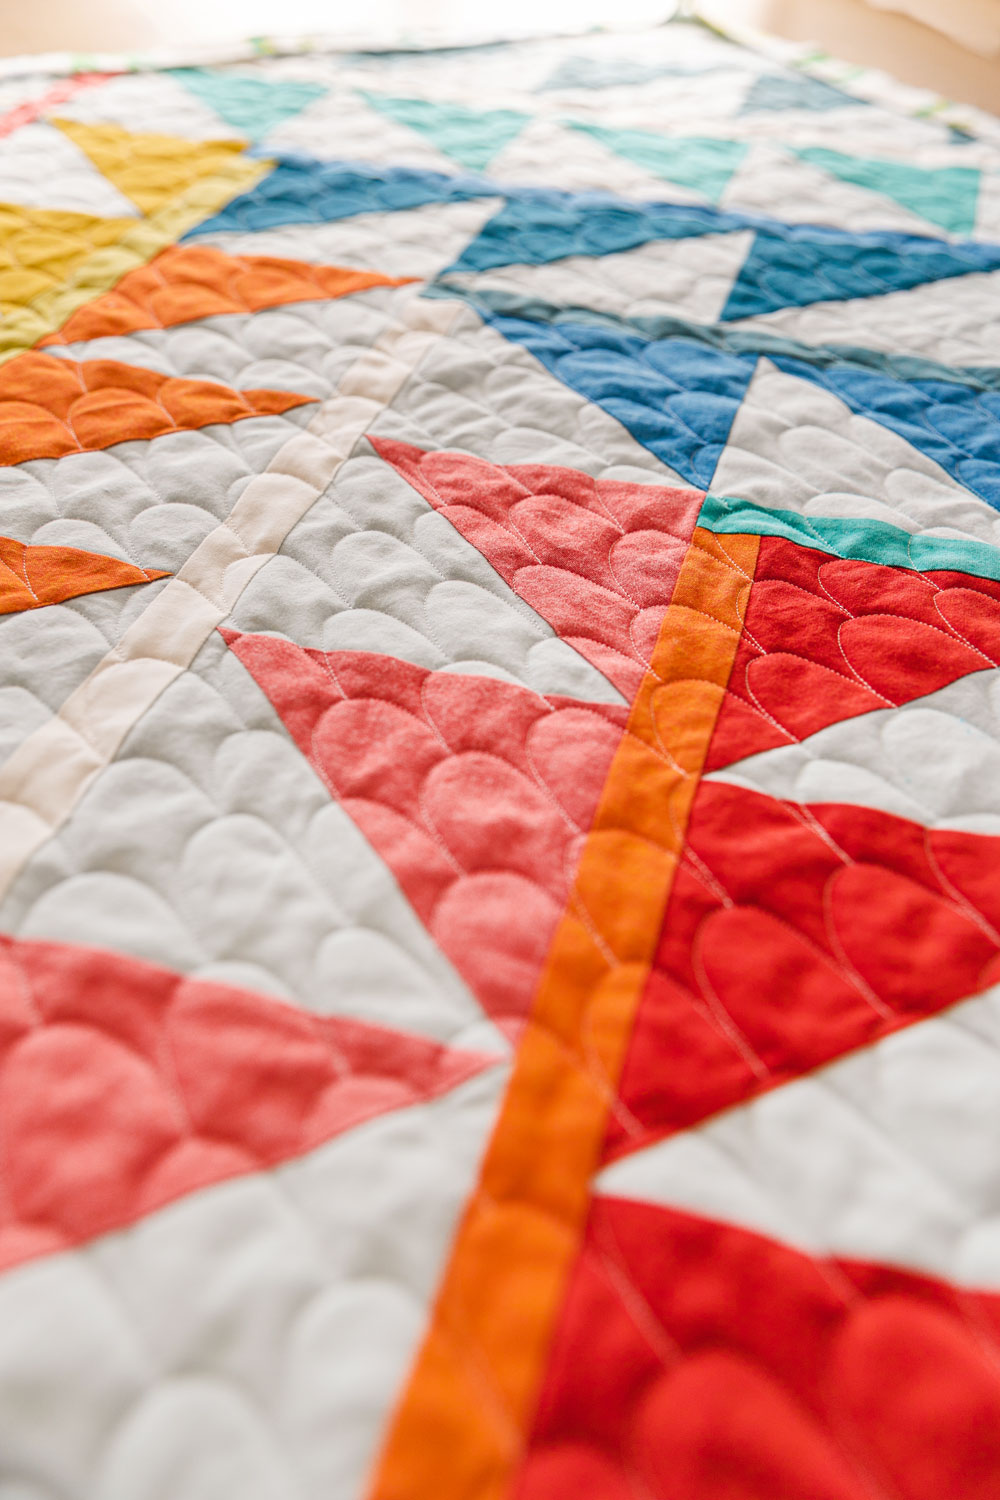 This simple free motion quilting tutorial will show you how easy and FUN free motion quilting can be! With just a few tools, and some practice, you will be a FMQ rockstar and able to quilt this adorable scallops motif just like me! suzyquilts.com #fmq #quilting